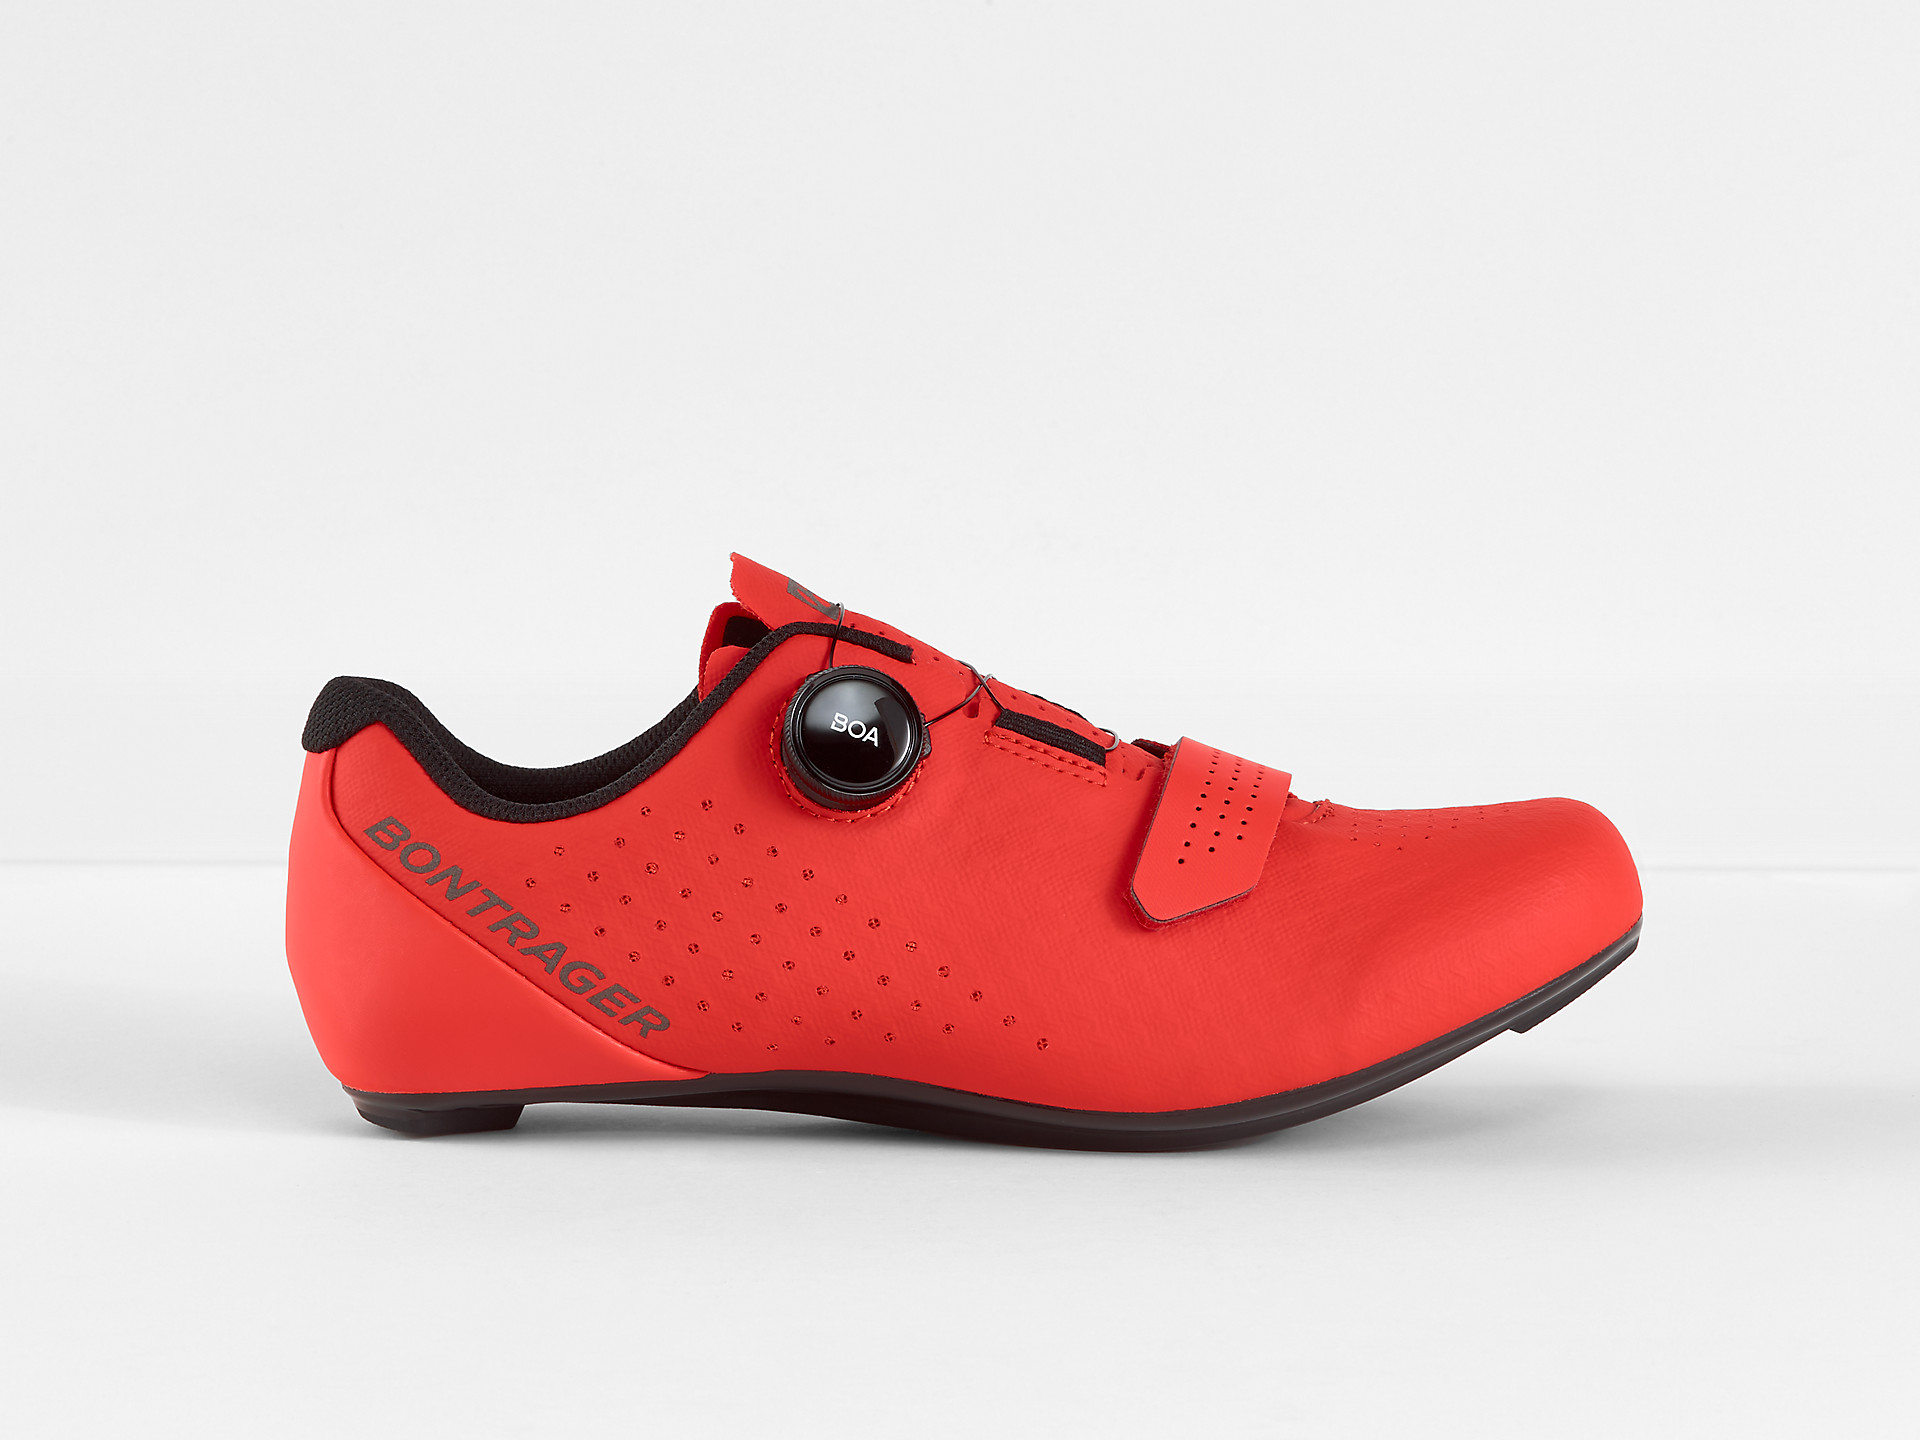 <a href="https://cycles-clement.be/product/chaussure-bont-circuit-race-46-red/">CHAUSSURE BONT CIRCUIT RACE 46 RED</a>